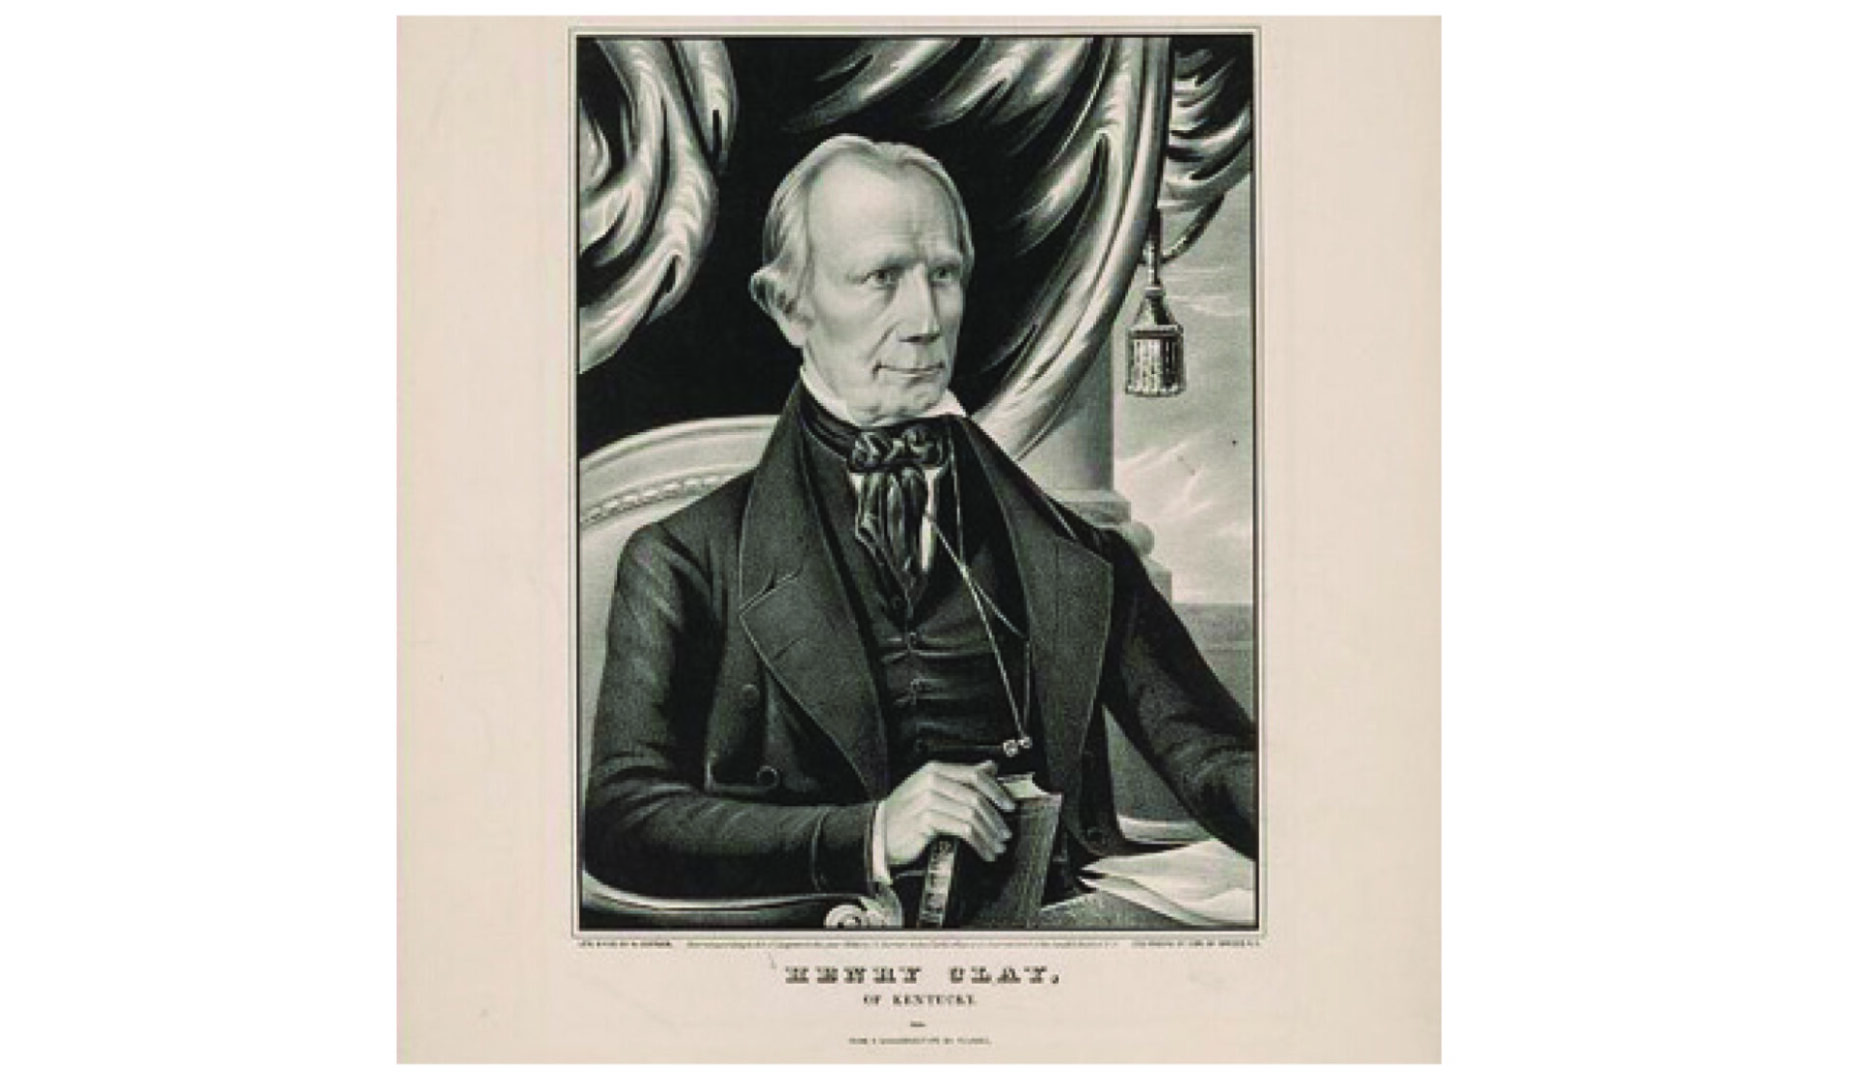 Library of Congress
This lithograph of Henry Clay of Kentucky was published c. 1848 by N. Currier of New York, New York and is based on a daguerreotype by John Plumbe Jr. Currier is half of the famous Currier & Ives partnership.